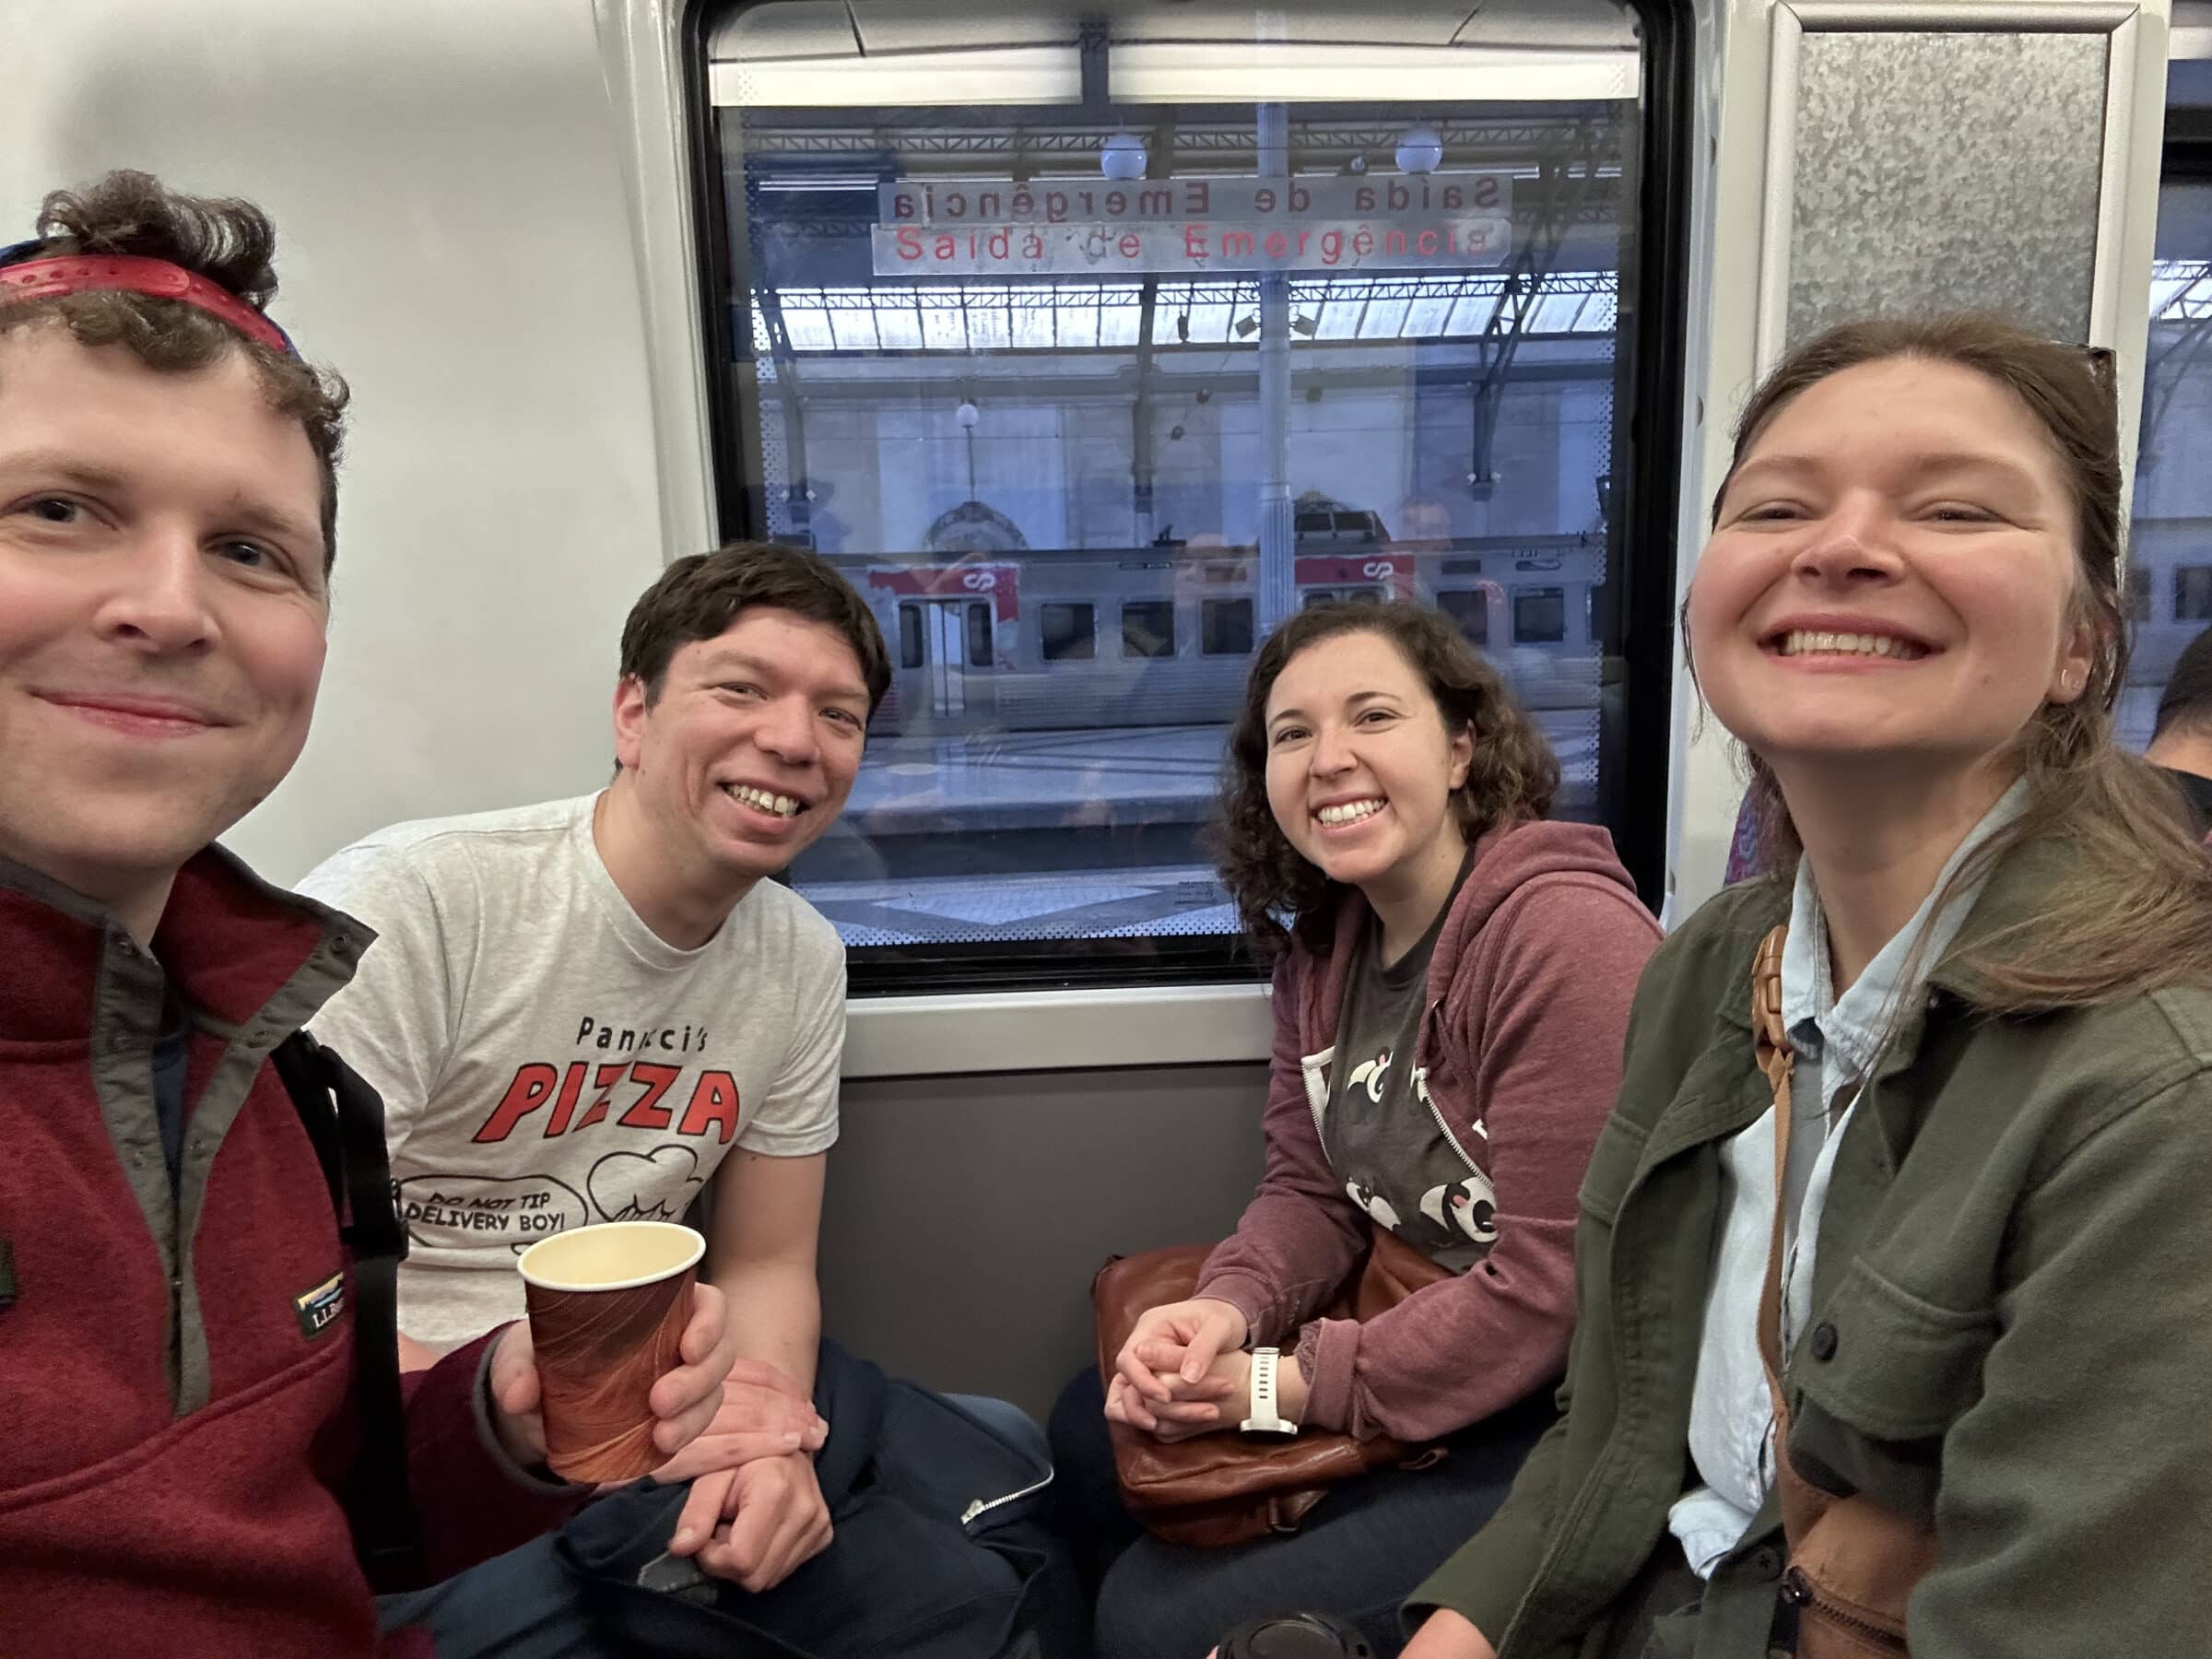 All together on our €5 train ride